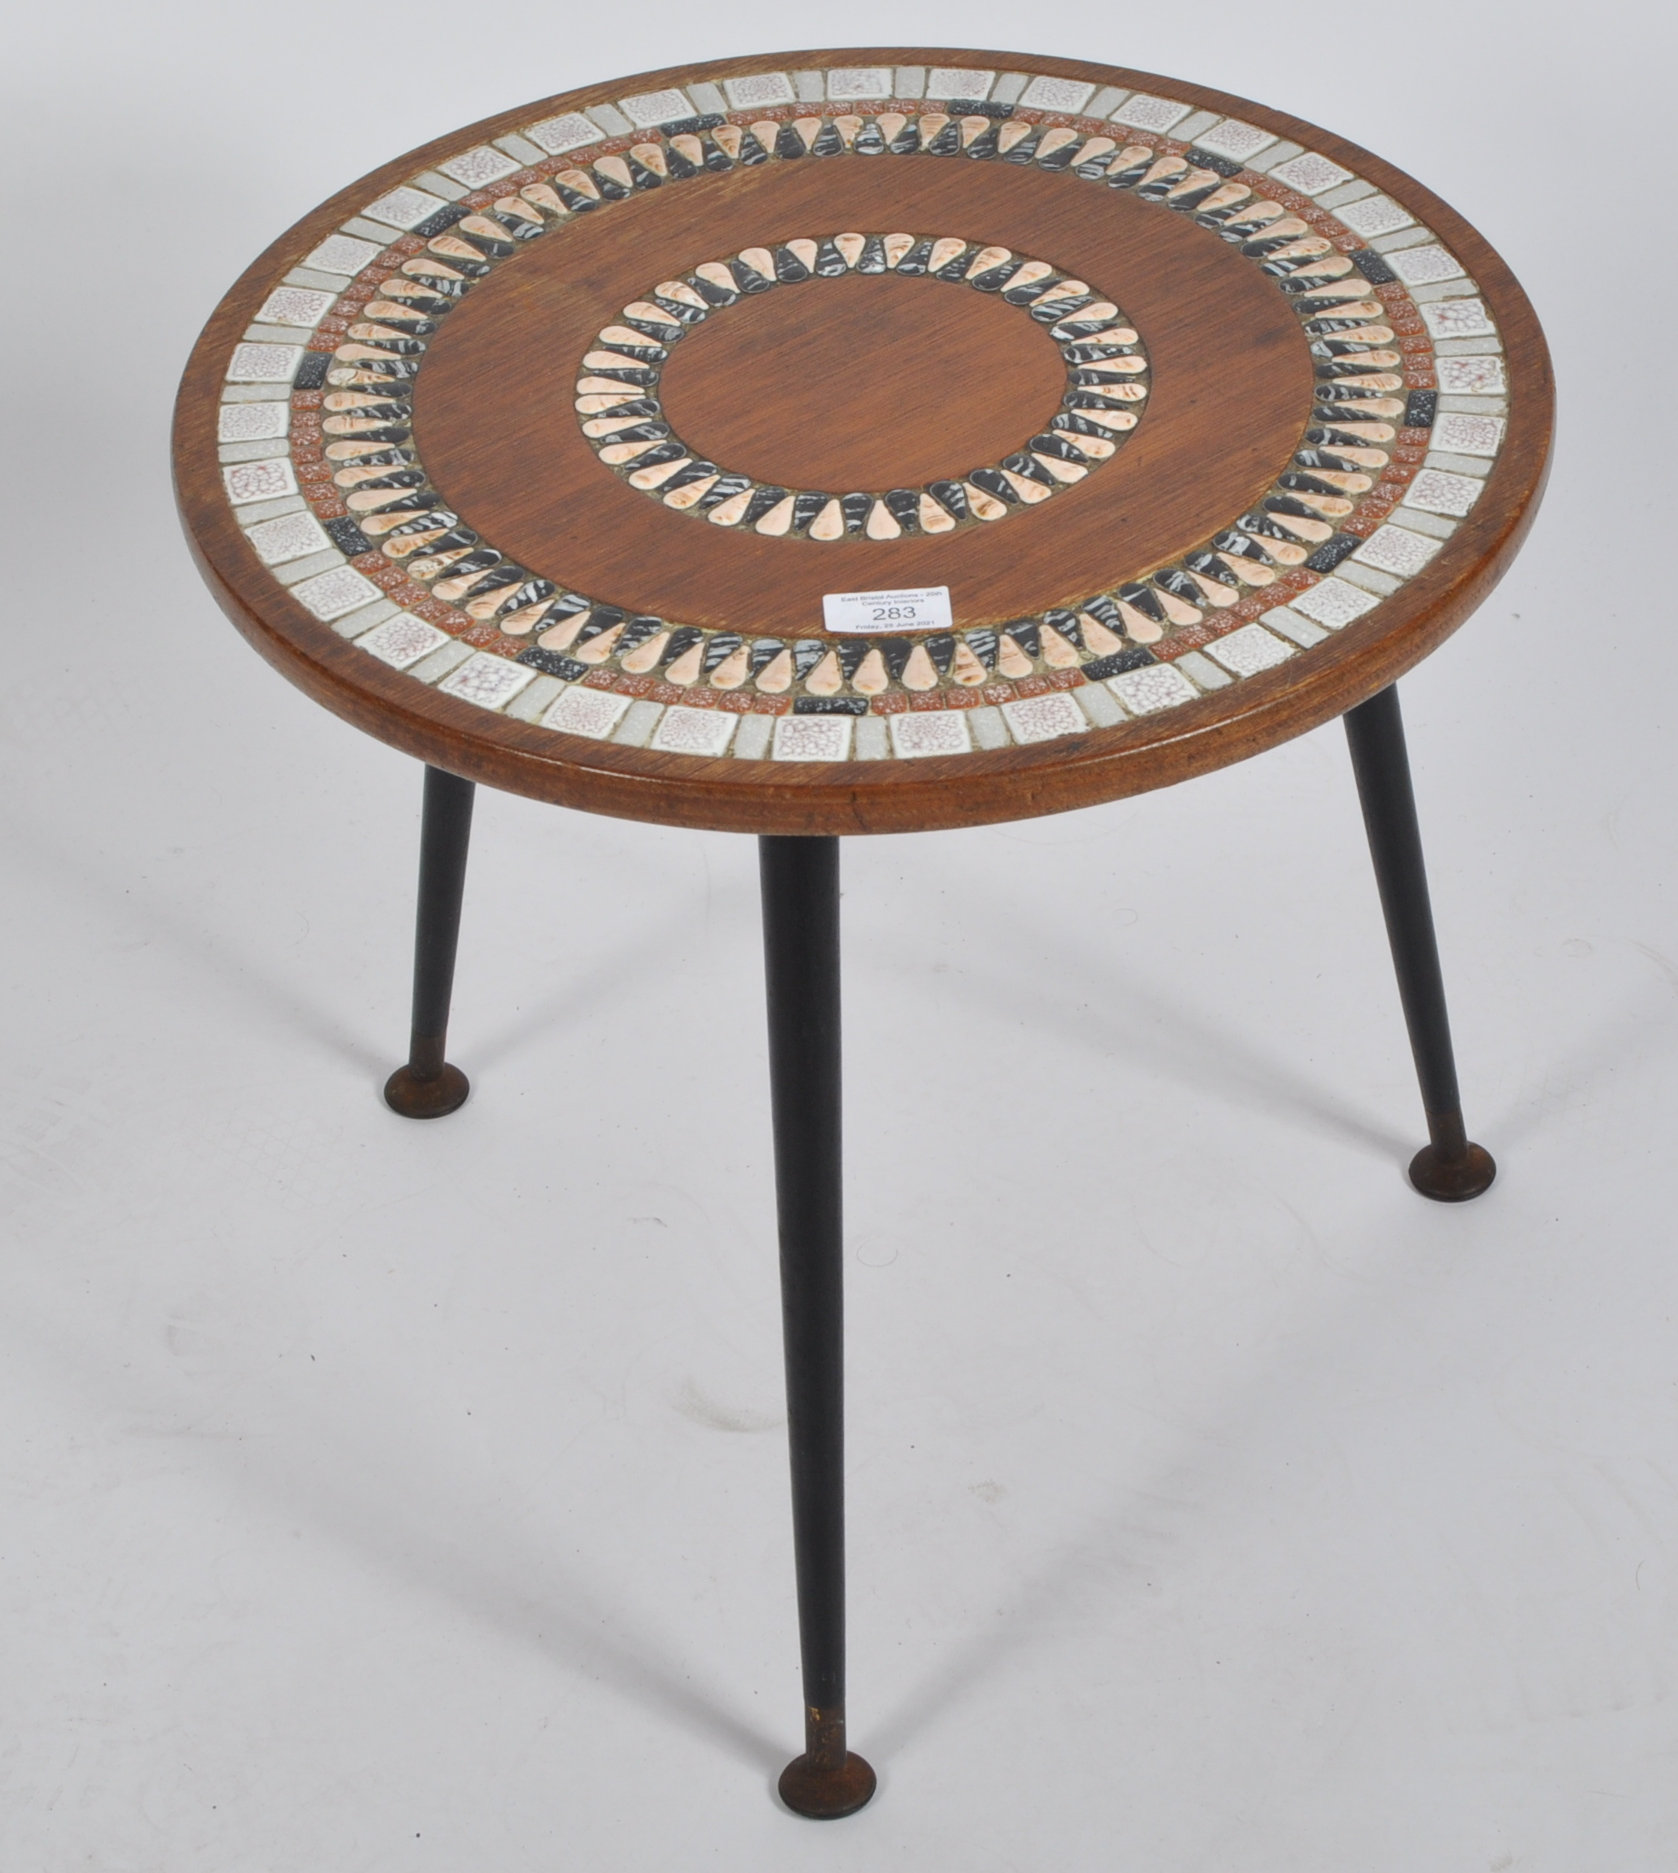 MID CENTURY MORDERN TEAK AND TILE MOSAIC TOP TABLE - Image 2 of 5